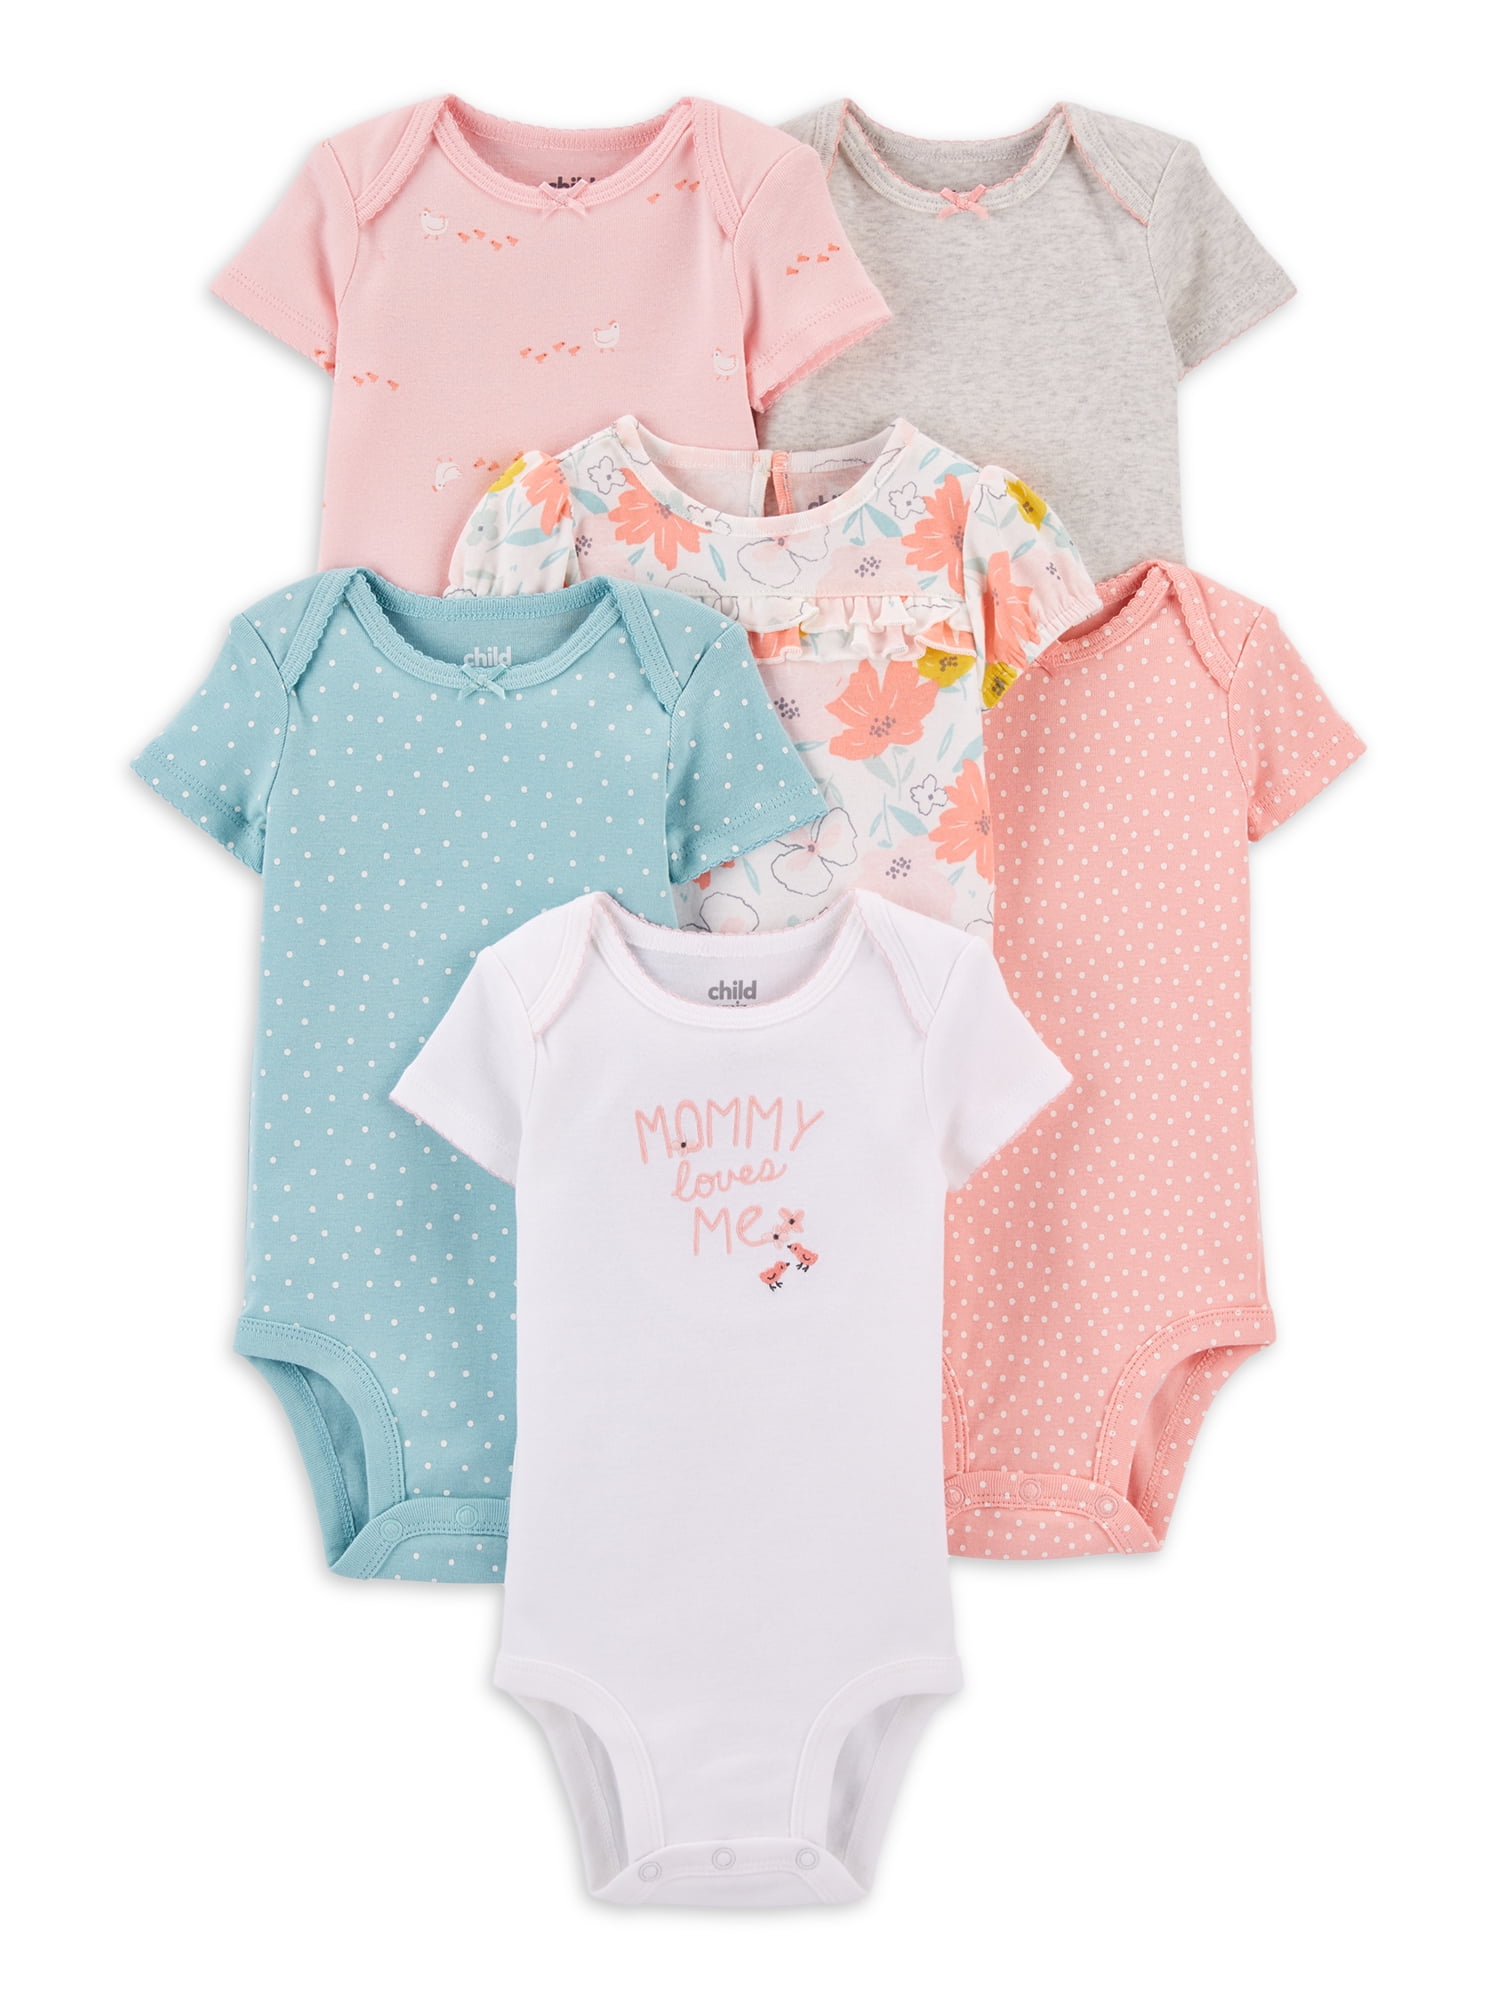 Baby Girls Pack of 3 Bodysuits Vests Short Sleeve Cotton 0-3 3-6 6-9 Months 